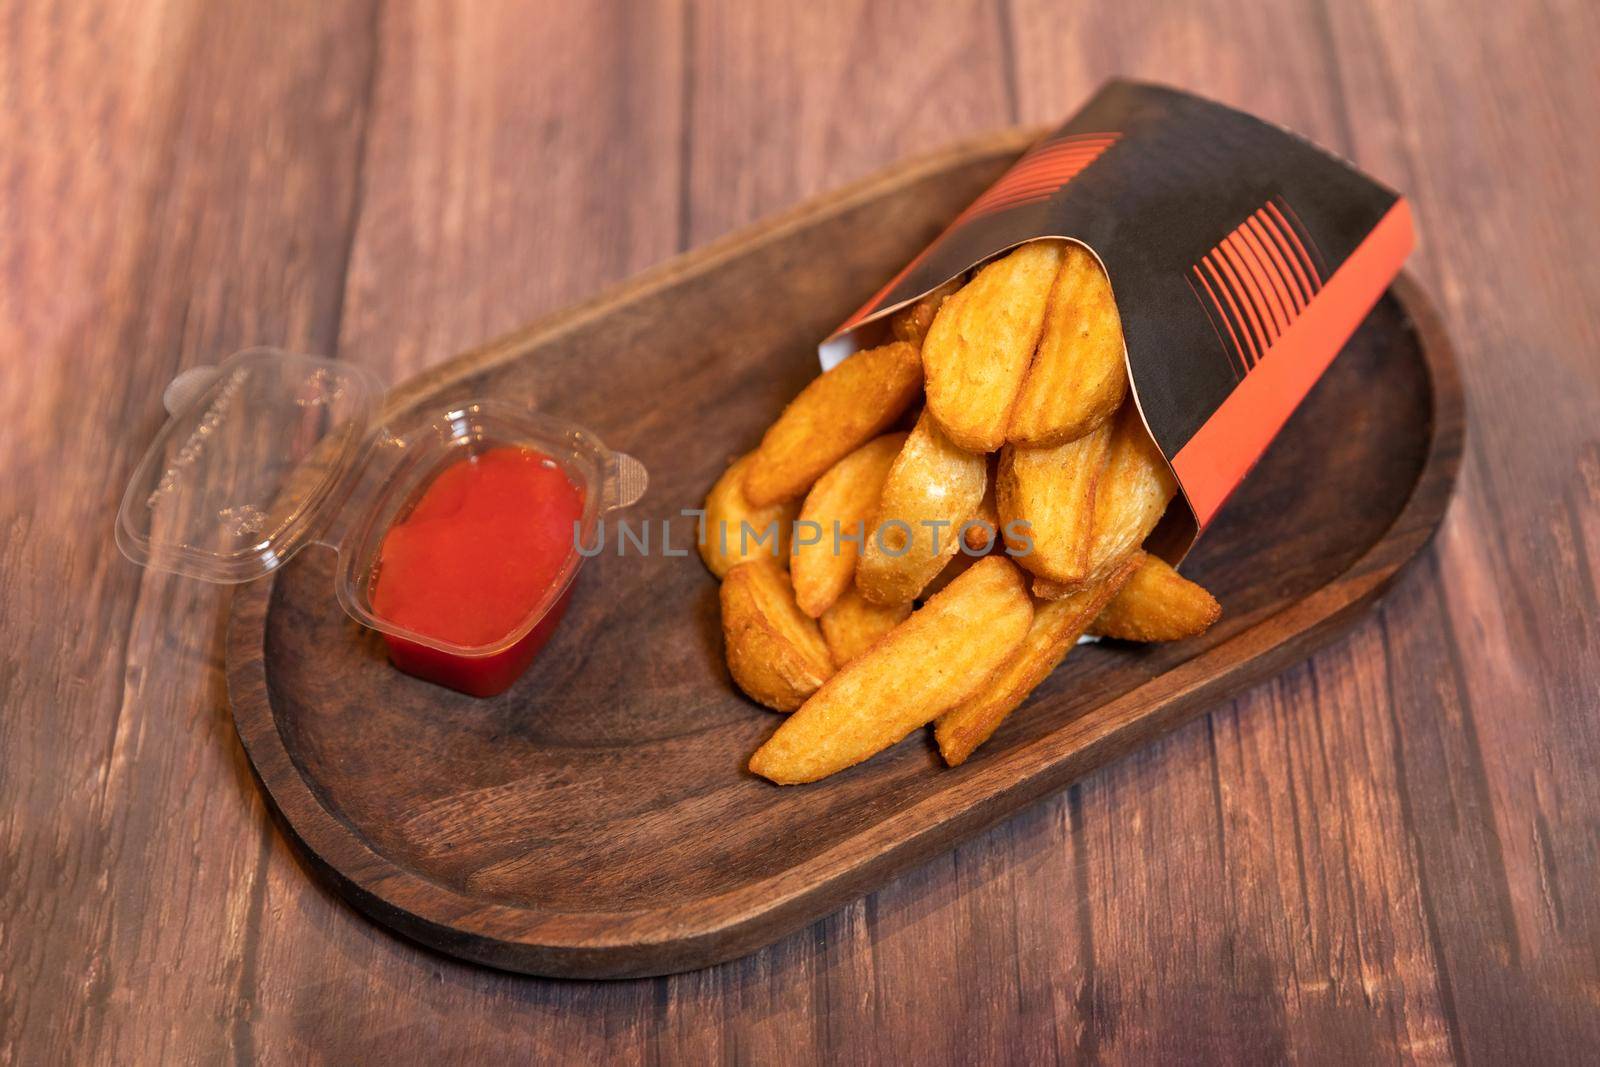 Tasty fried potatoes with ketchup by ferhad